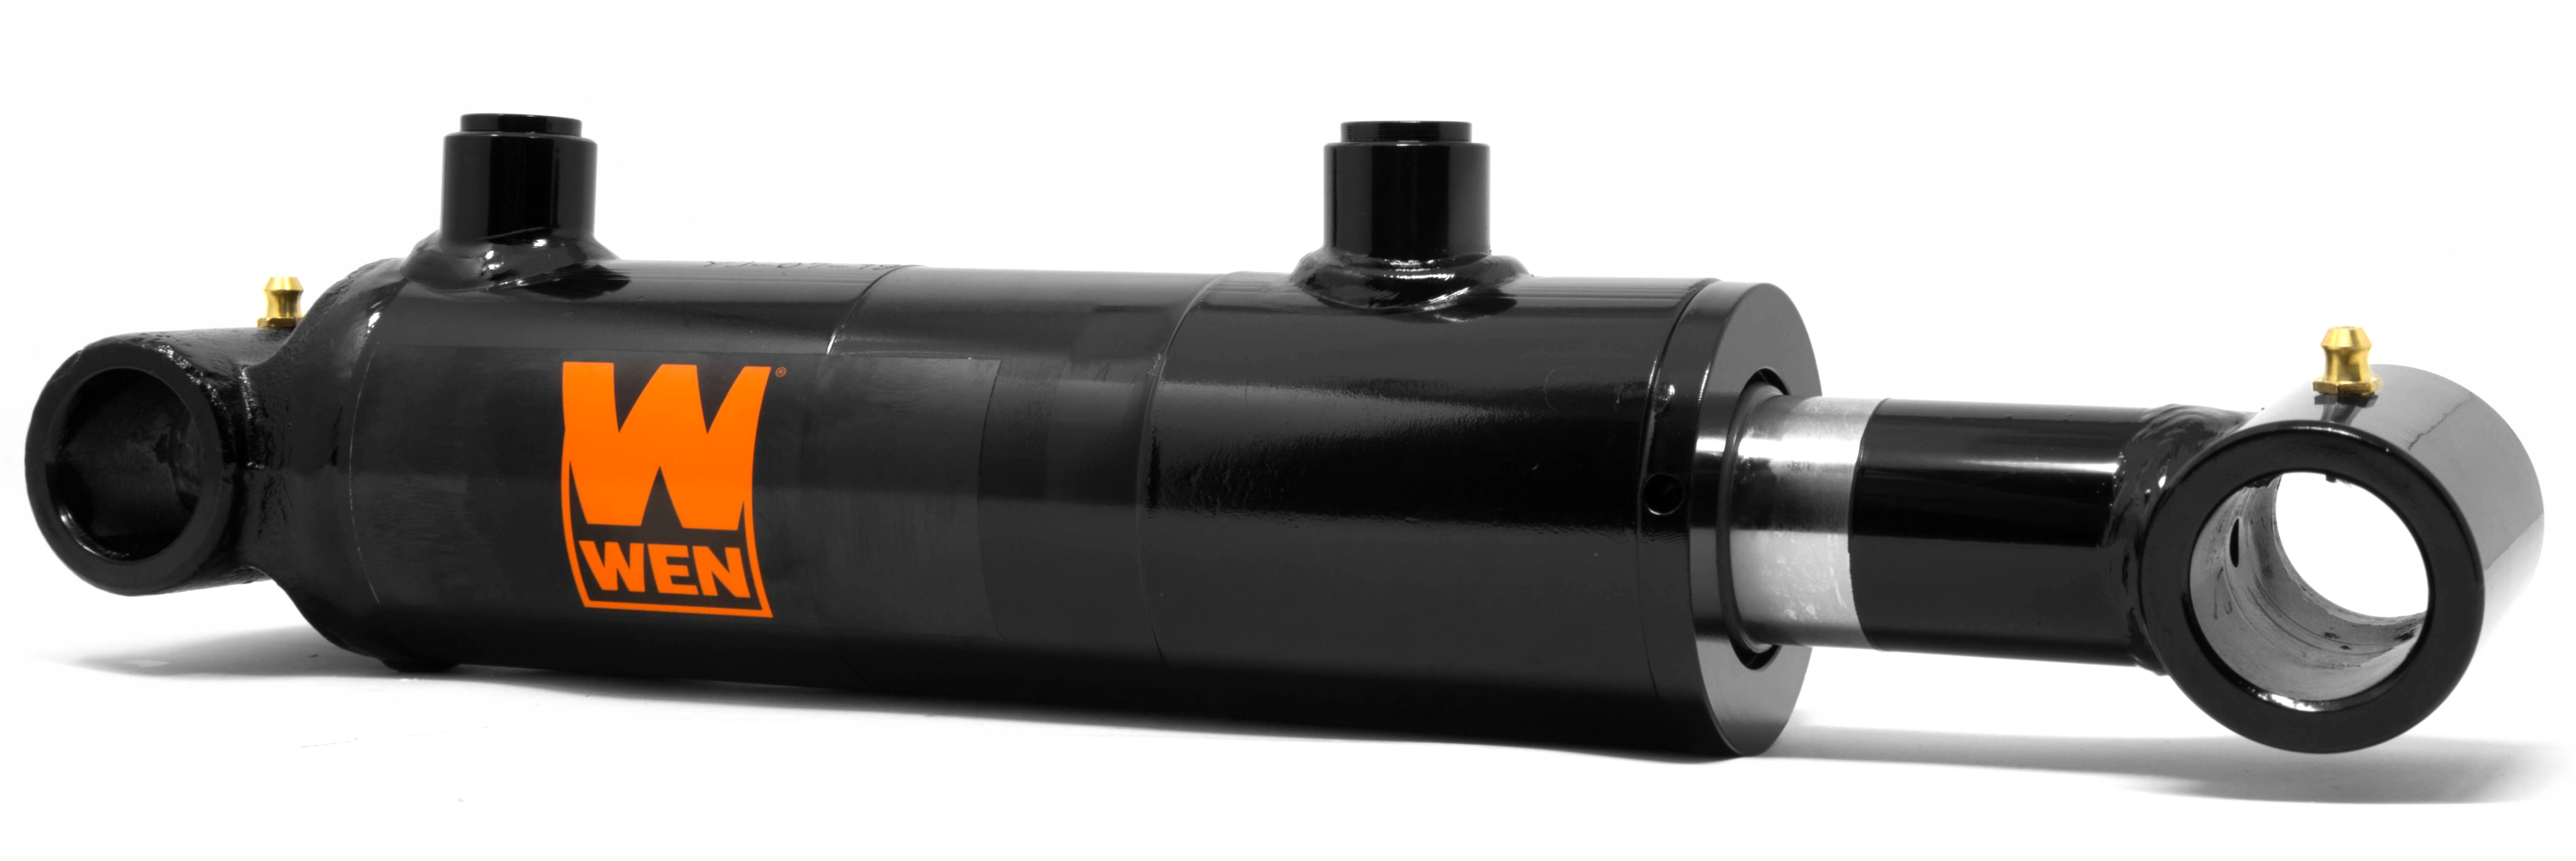 Wen Cross Tube Hydraulic Cylinder With 2 Inch Bore And 8 Inch Stroke